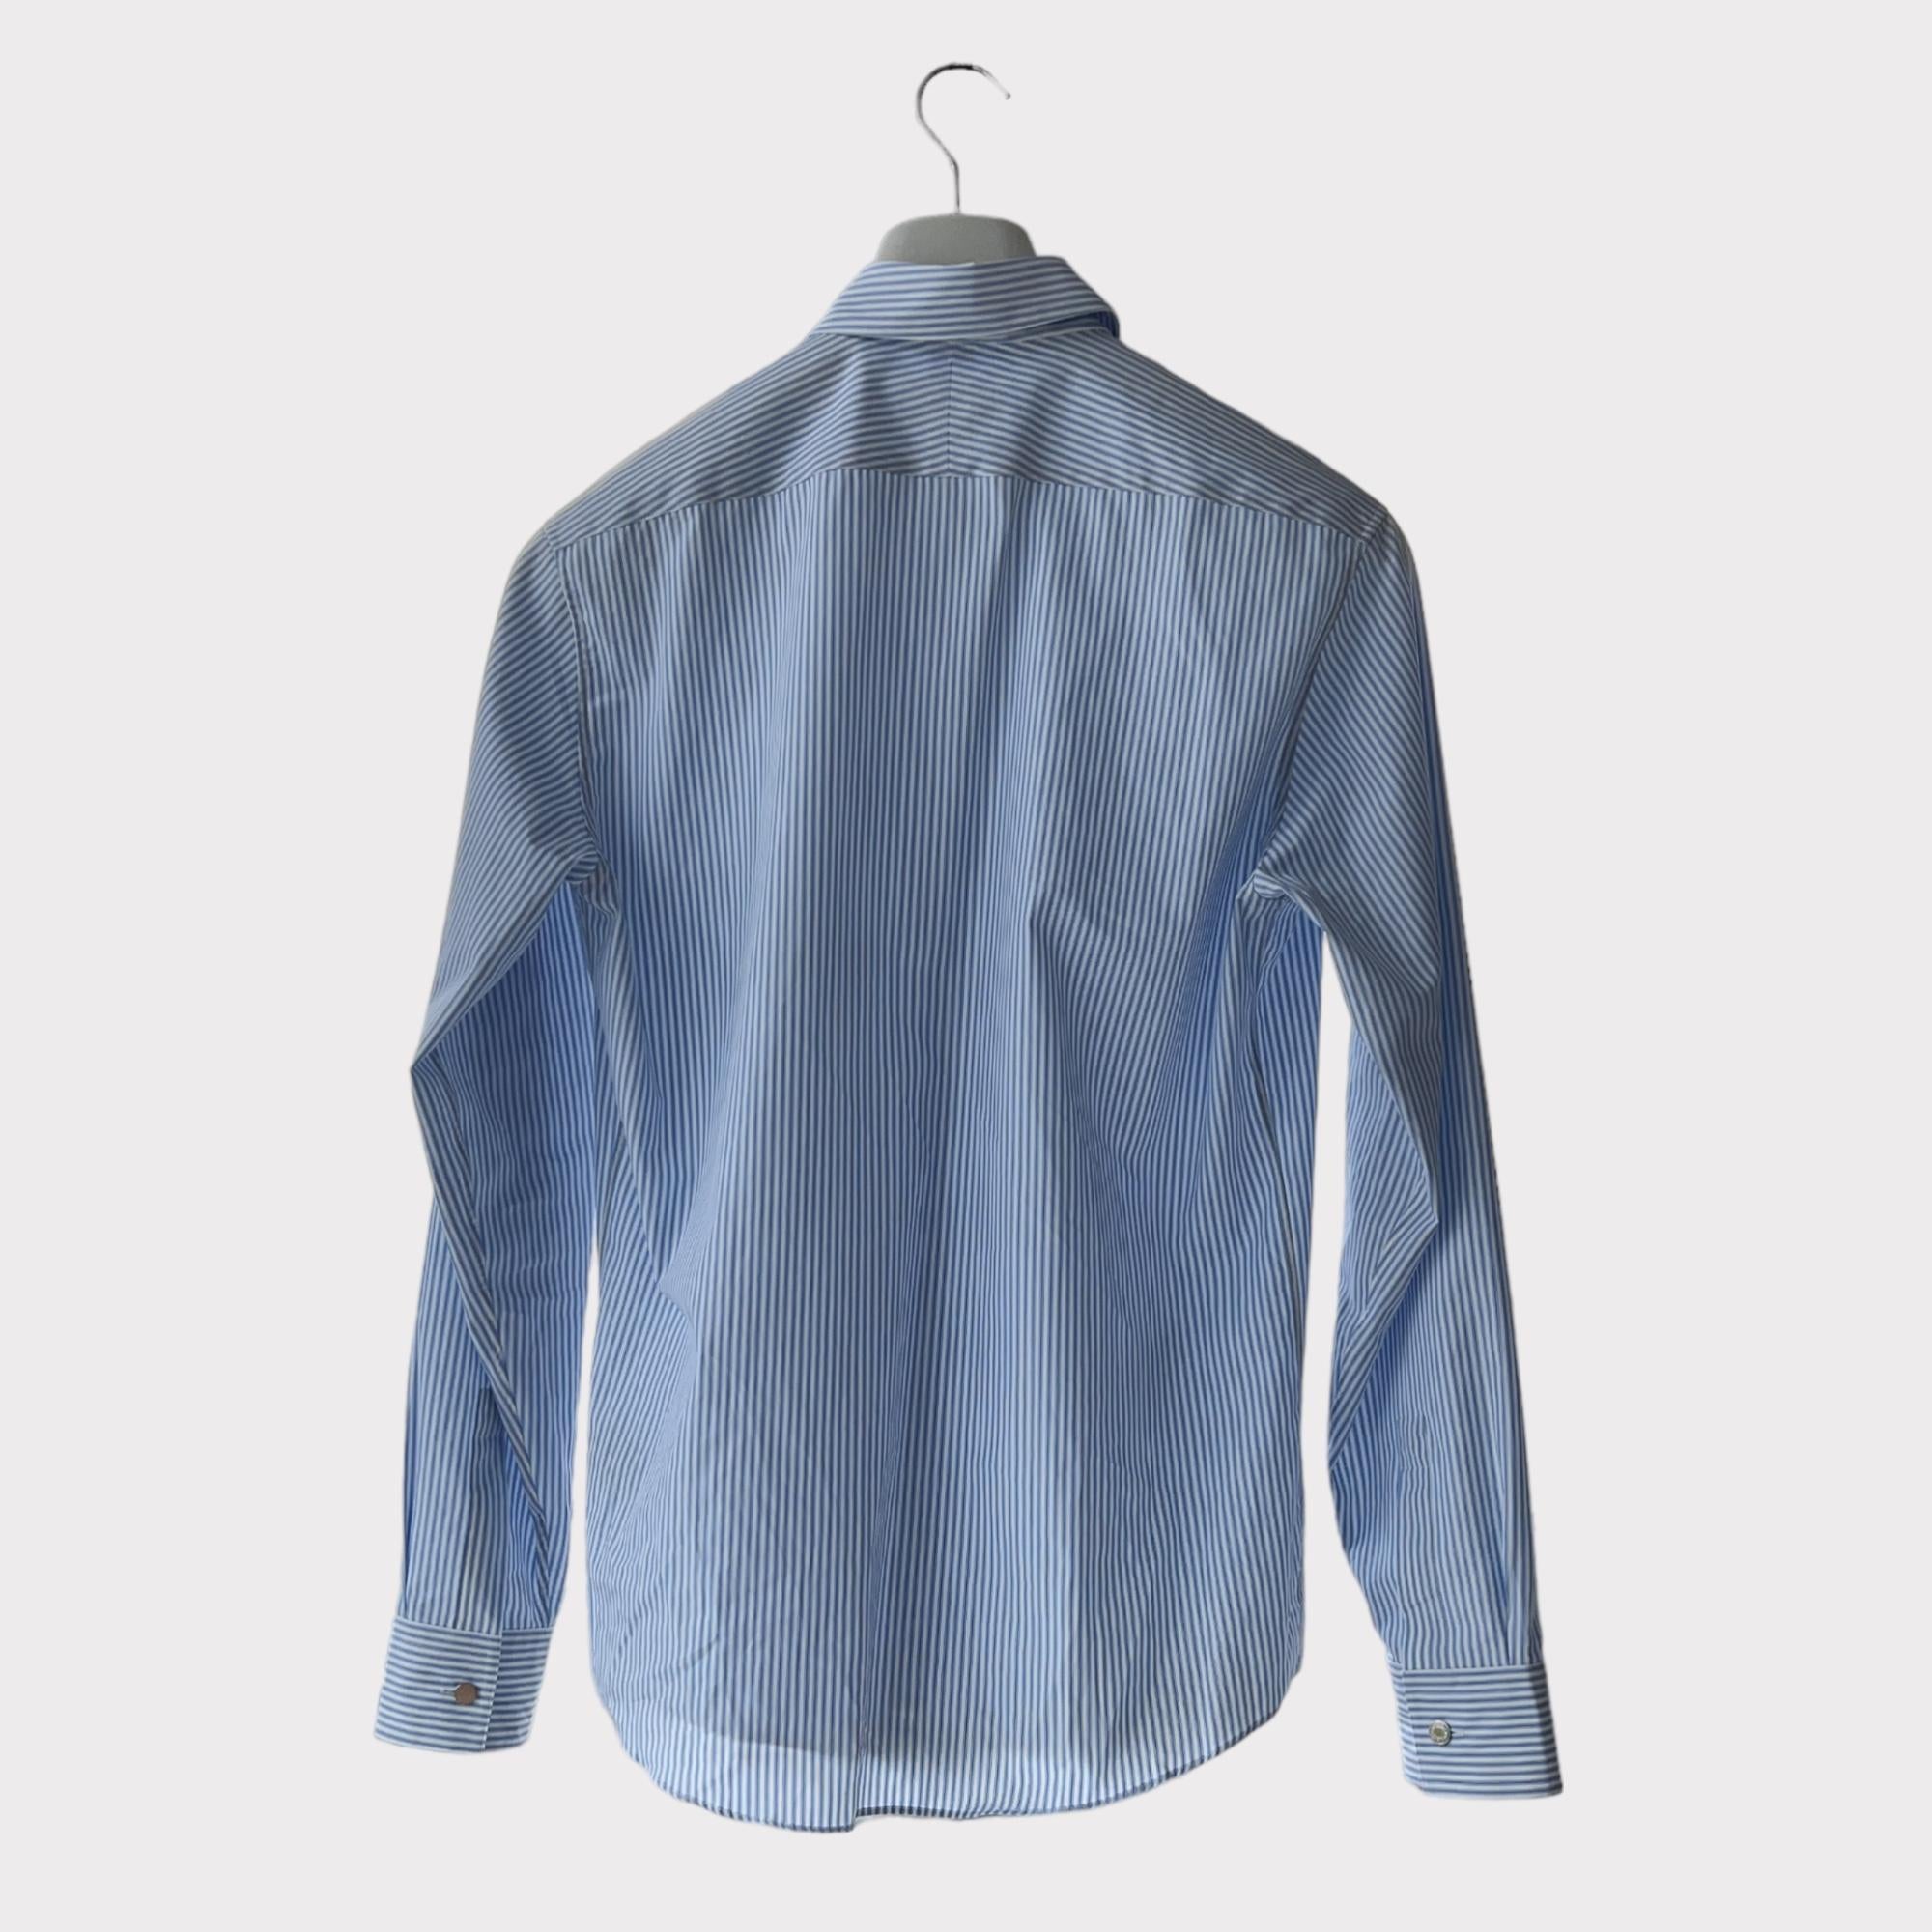 Shop this unique piece Hermès Men's 'Sportif Patch' Shirt in size 39 EU. It is handmade from 100% cotton with unique patches. Each shirt has been custom designed with a different pattern and only 1 available for each size. 

Brand: Hermès

Colour: